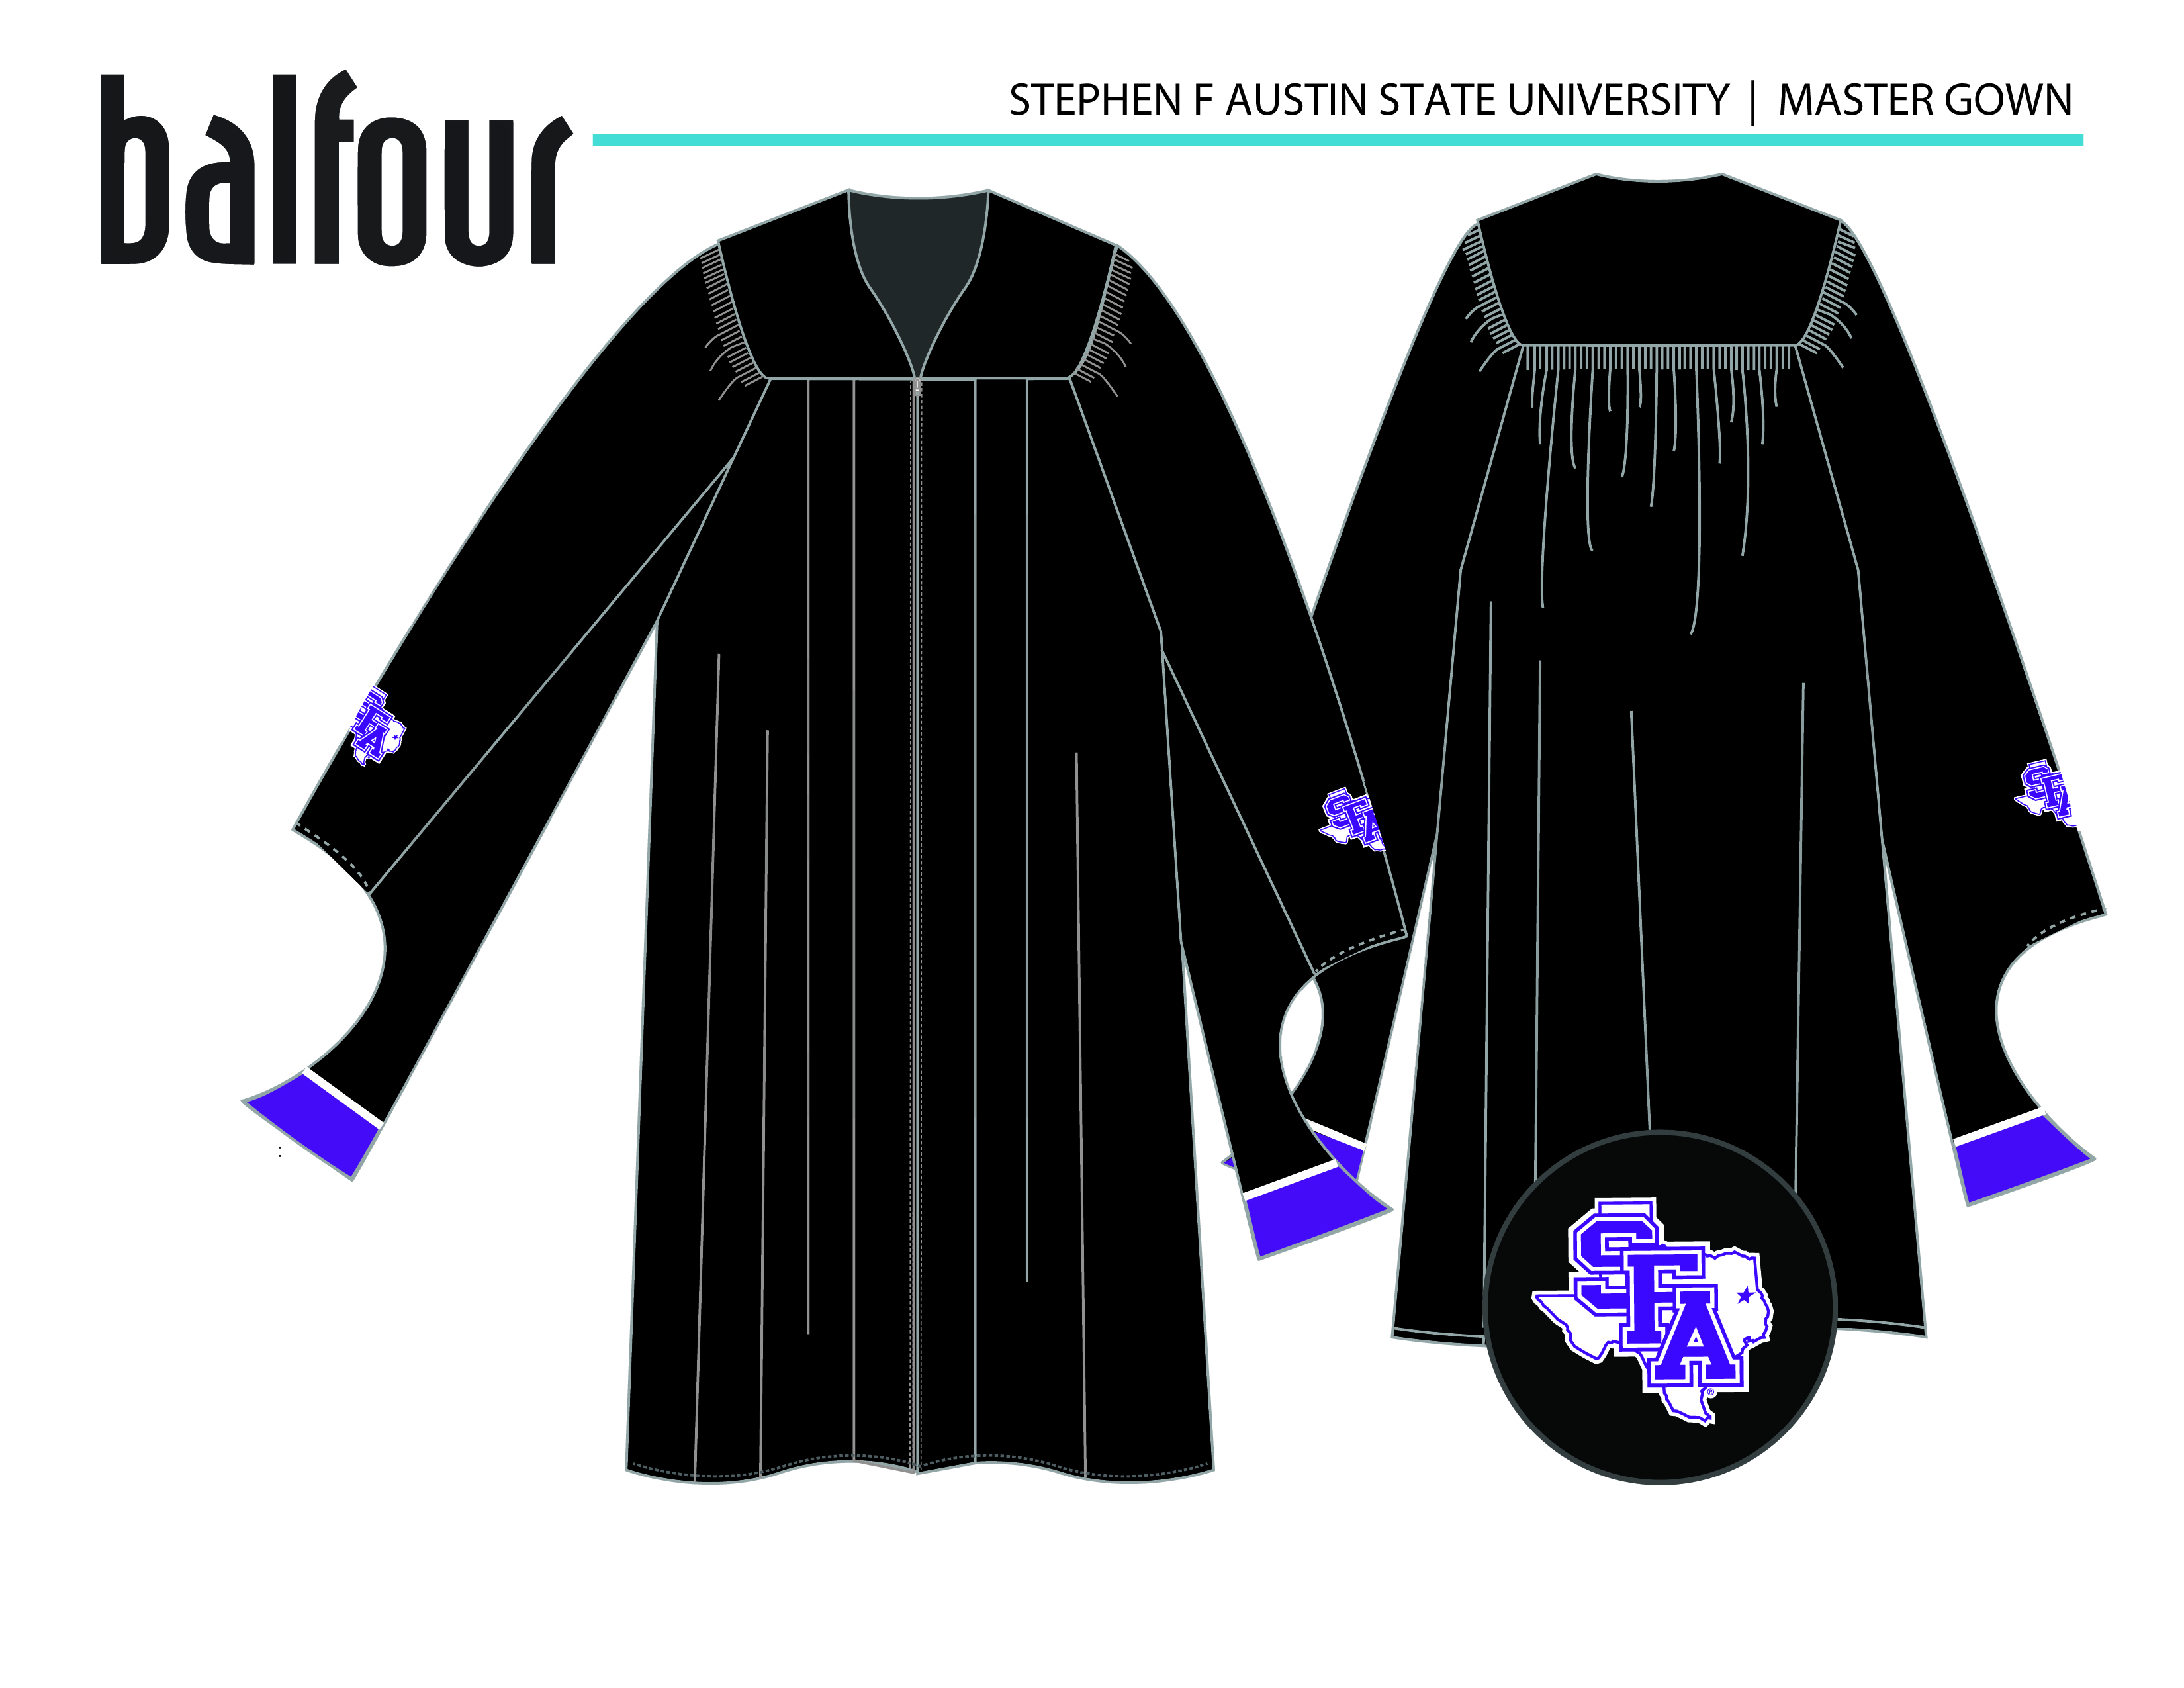 SFA Master Gown